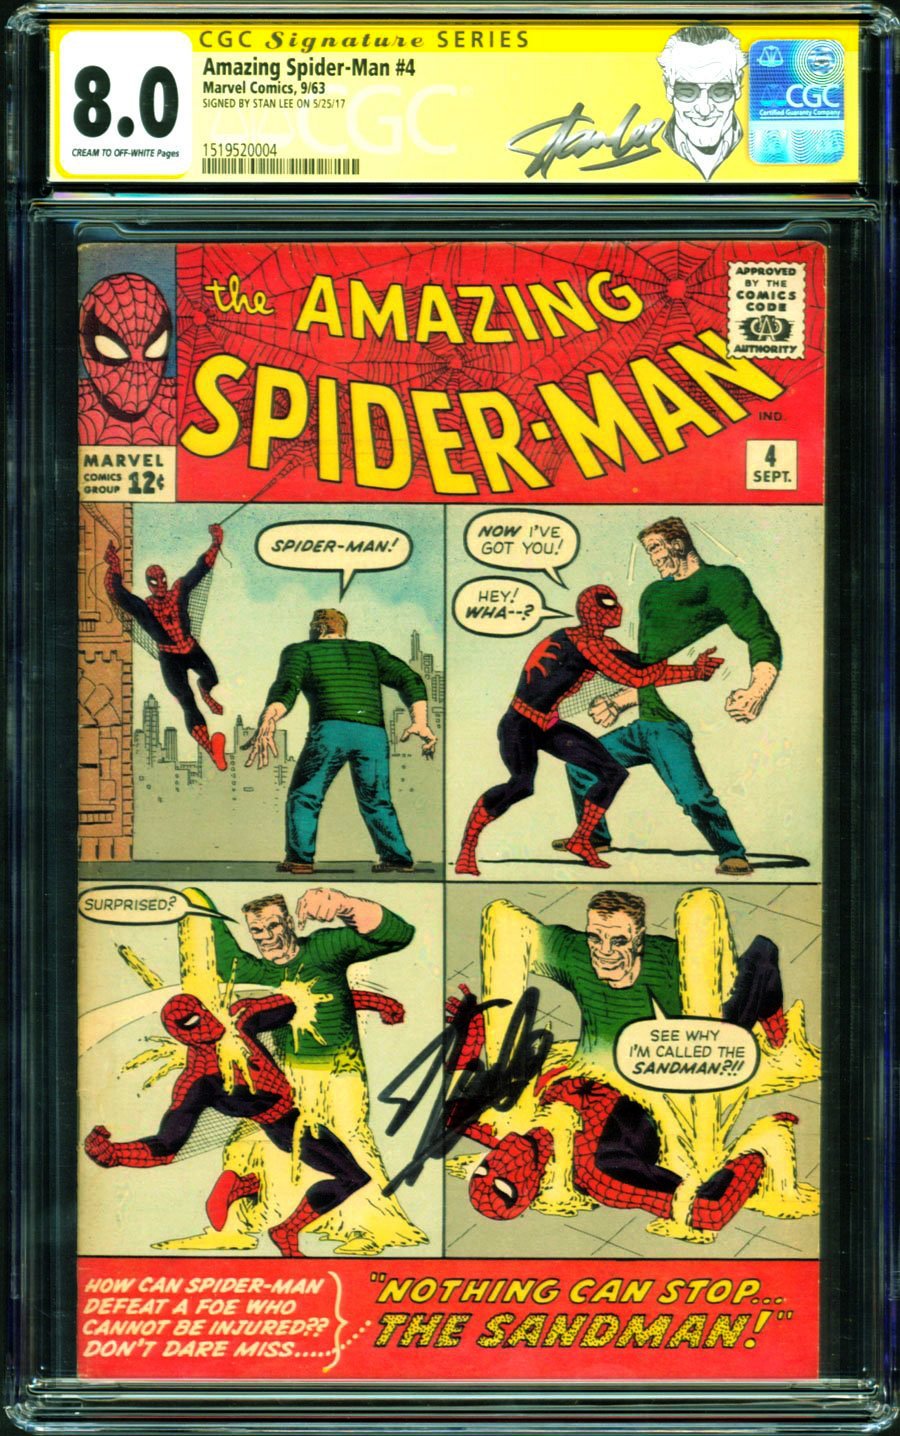 ComicConnect - Event Auction Highlight: Signature Series Spider-Man